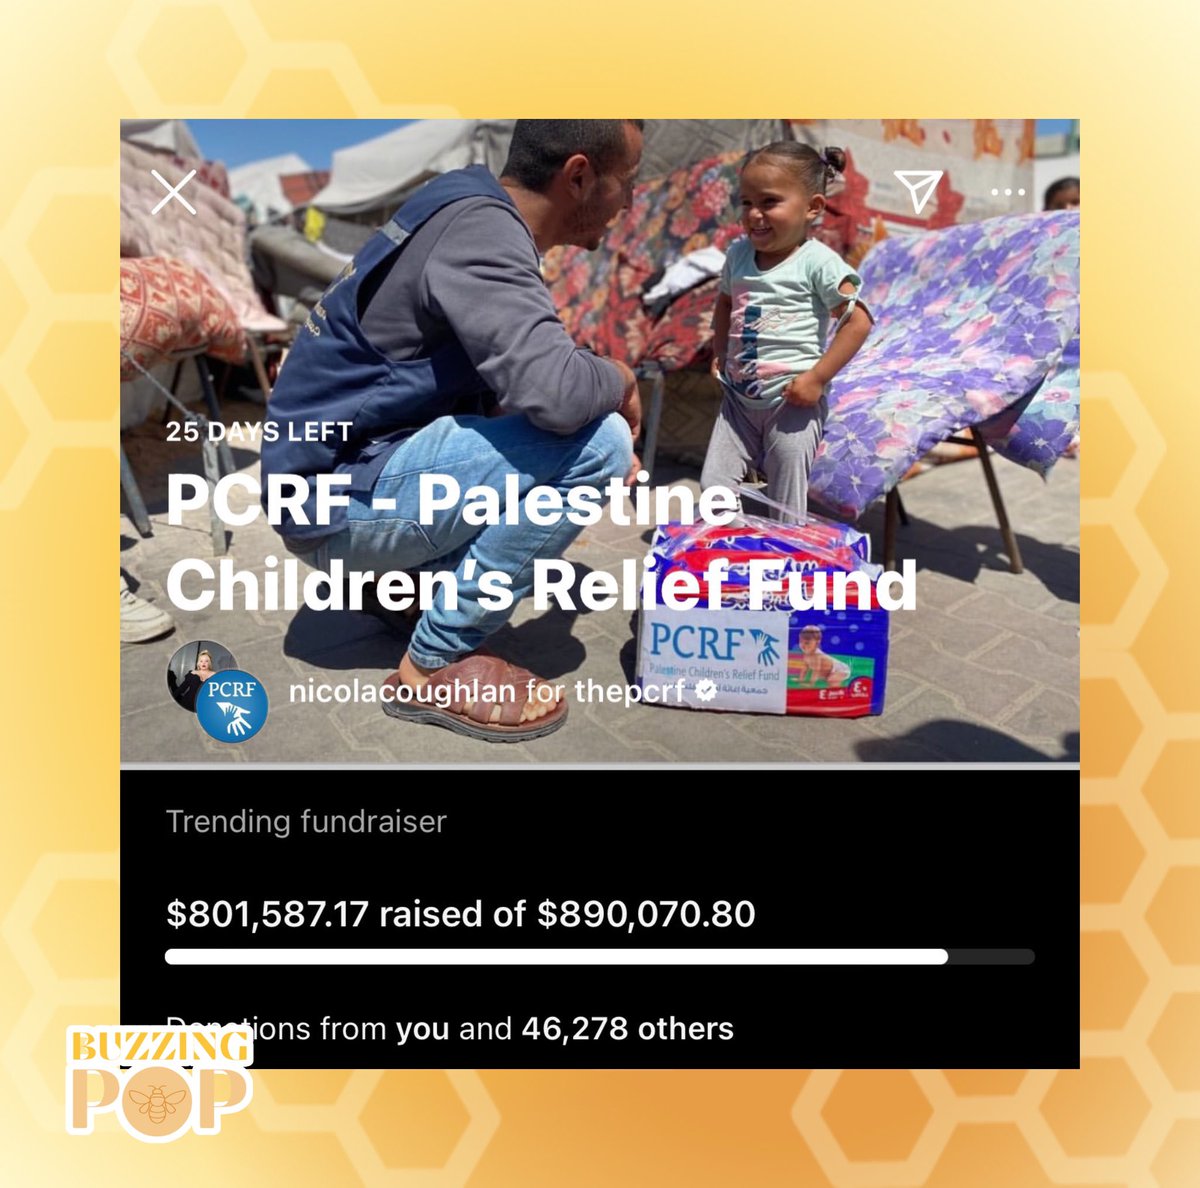 Palestine Children’s Relief Fund raised an additional $622k in less than 24 hours after celebrities like Ariana Grande and Jenna Ortega, among others, shared the donation link. It has raised so far $801k.